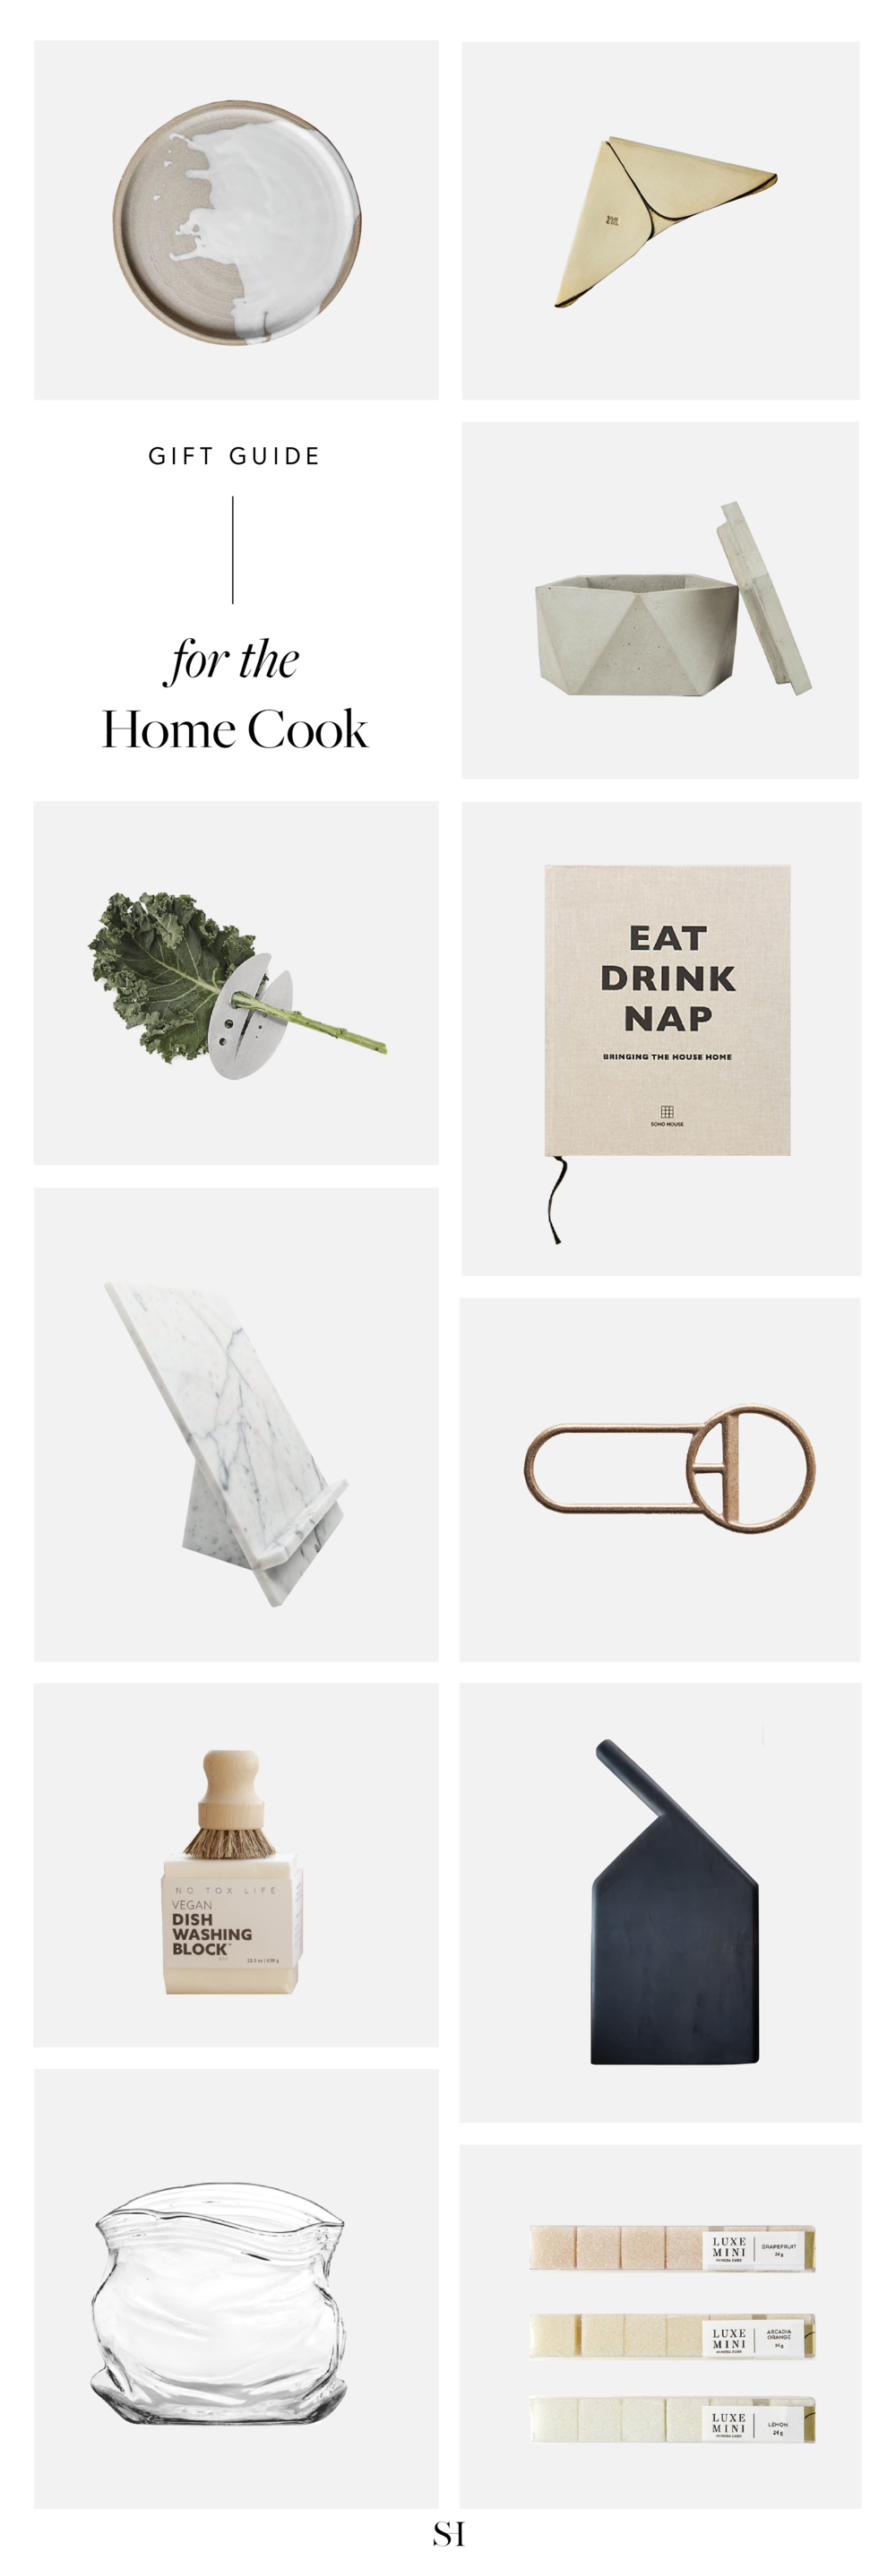 Holiday Christmas Gift Guide Ideas for The Host or Home Cook with Minimal Style by The Savvy Heart.png